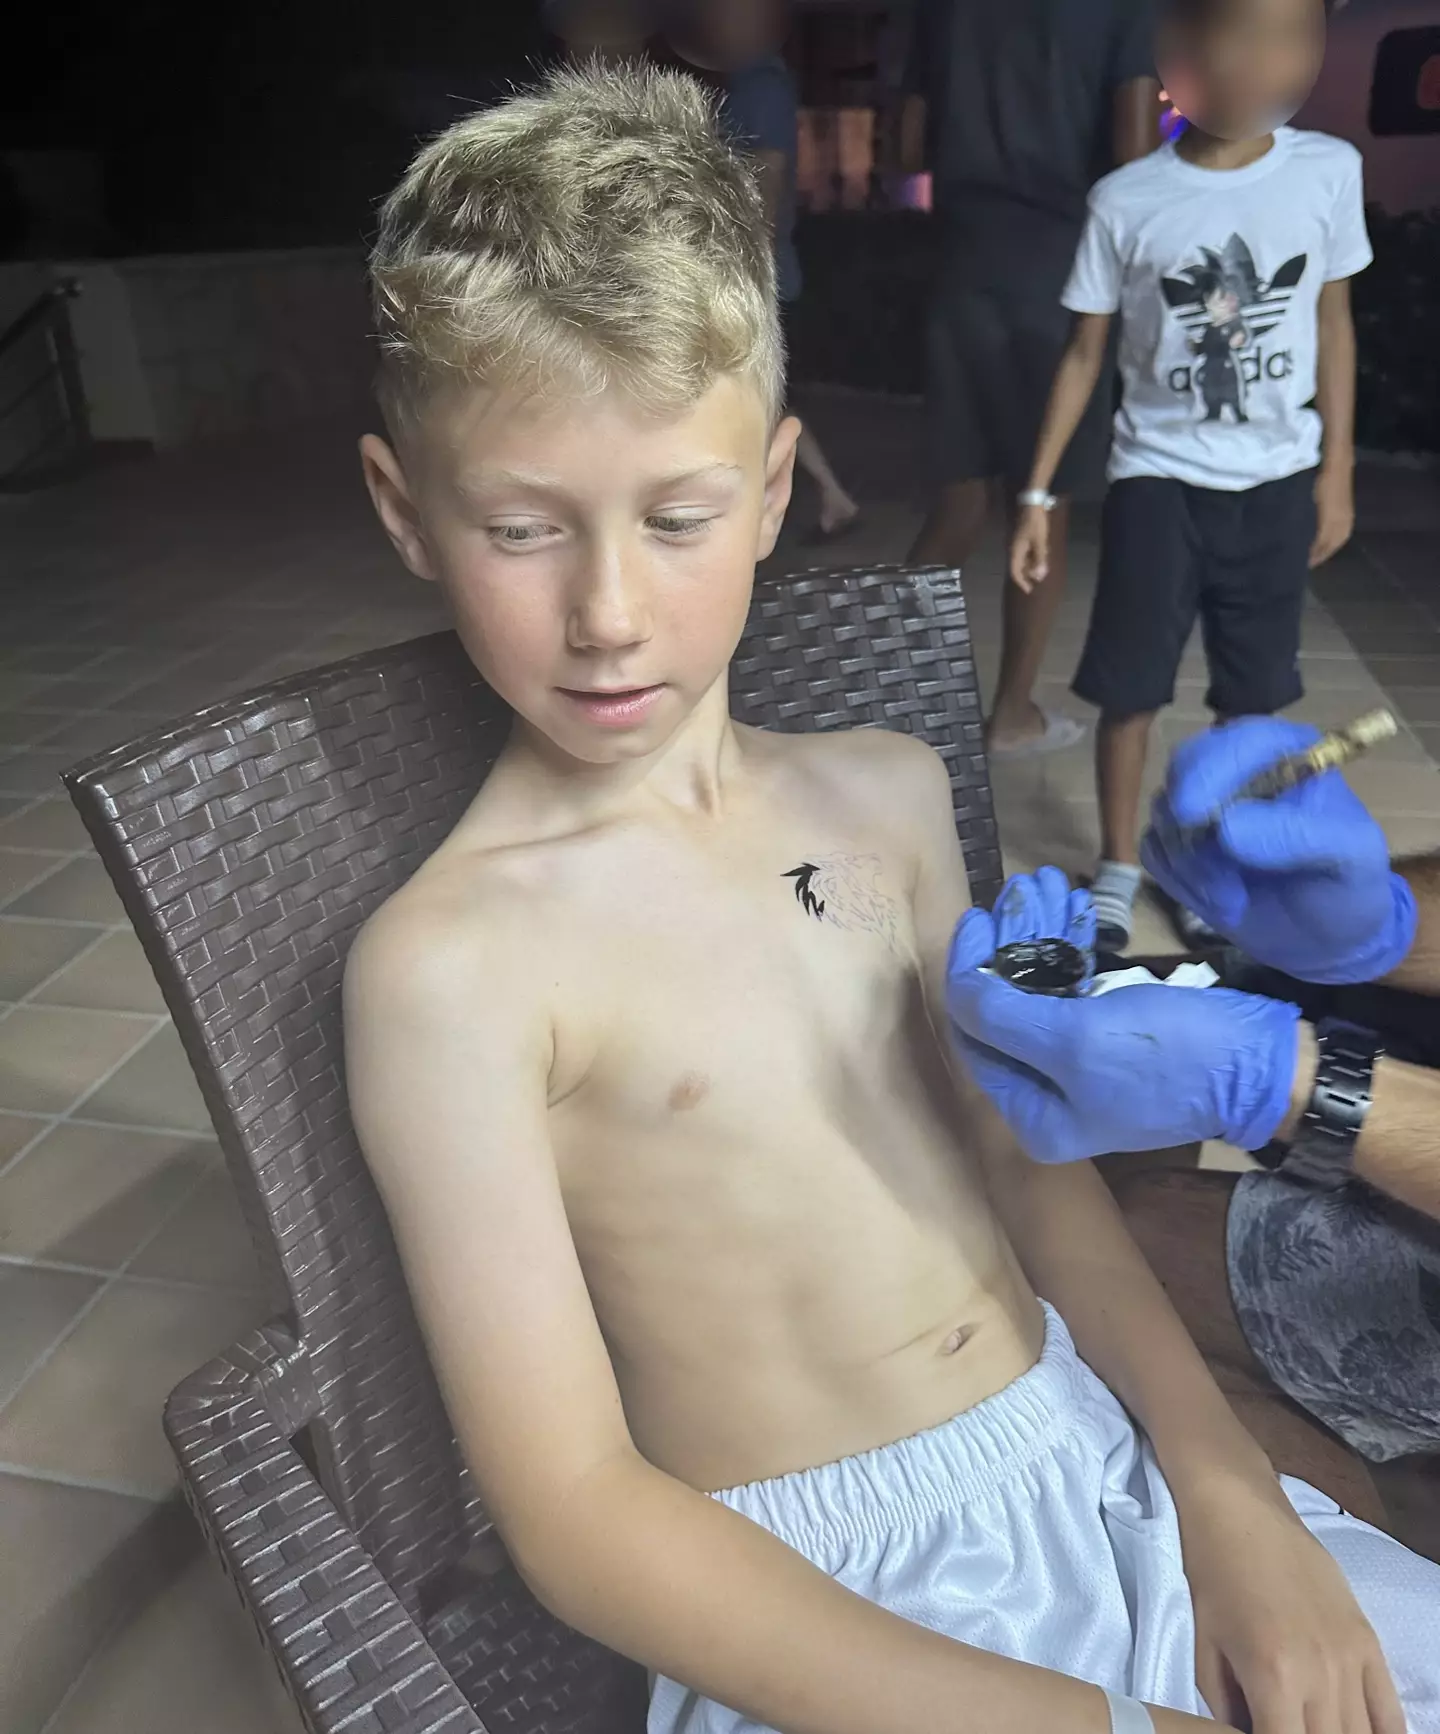 Ollie had a henna tattoo while on holiday with his family.